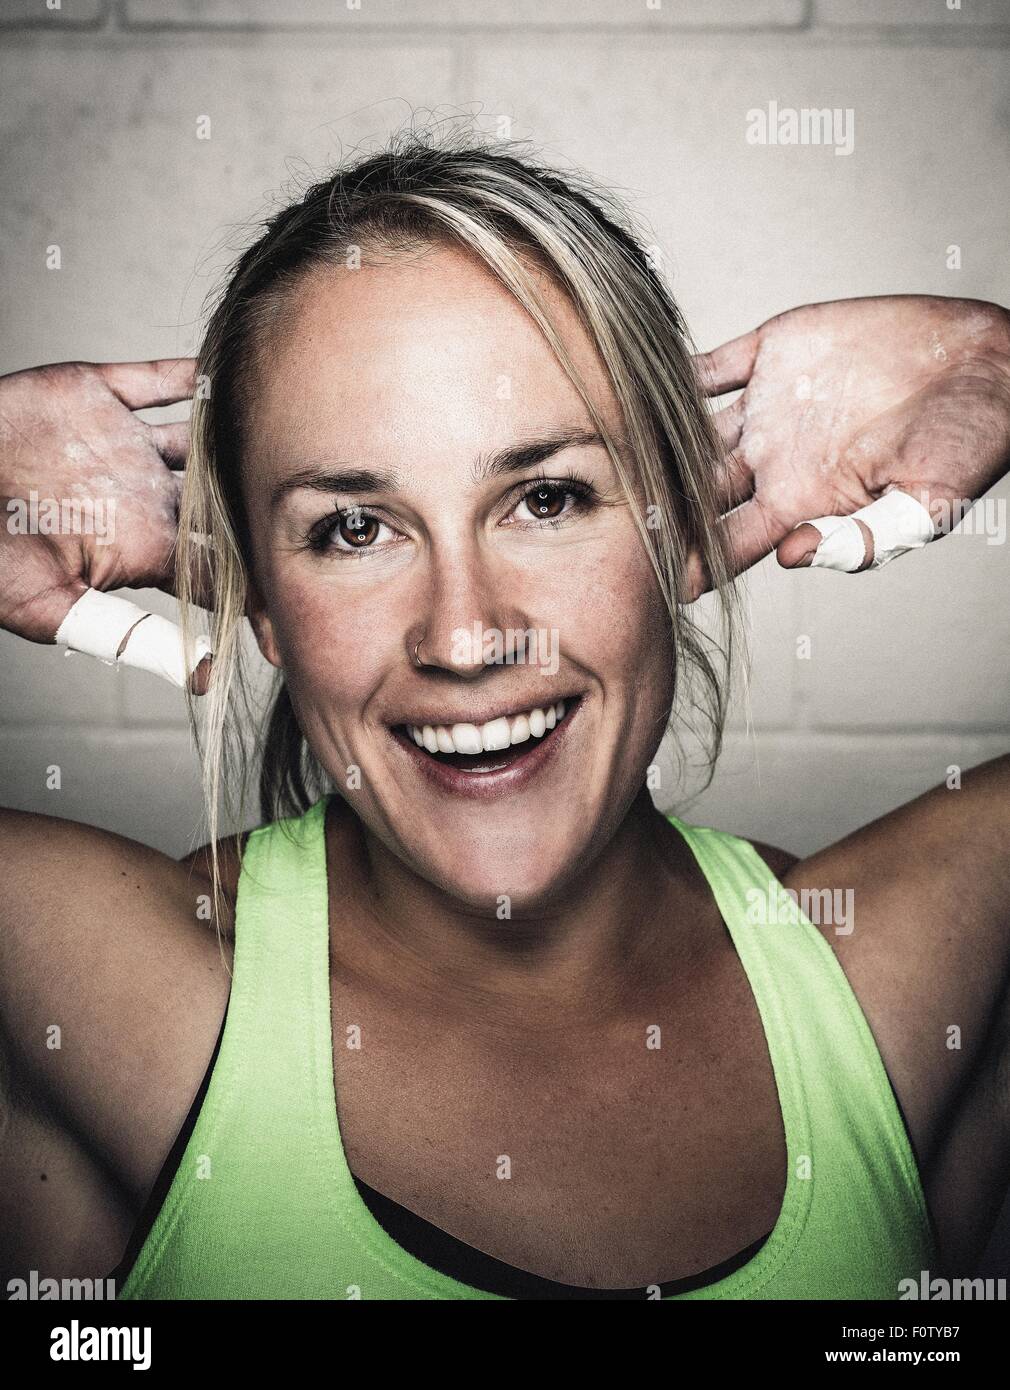 Portrait of smiling mid adult woman before workout Stock Photo